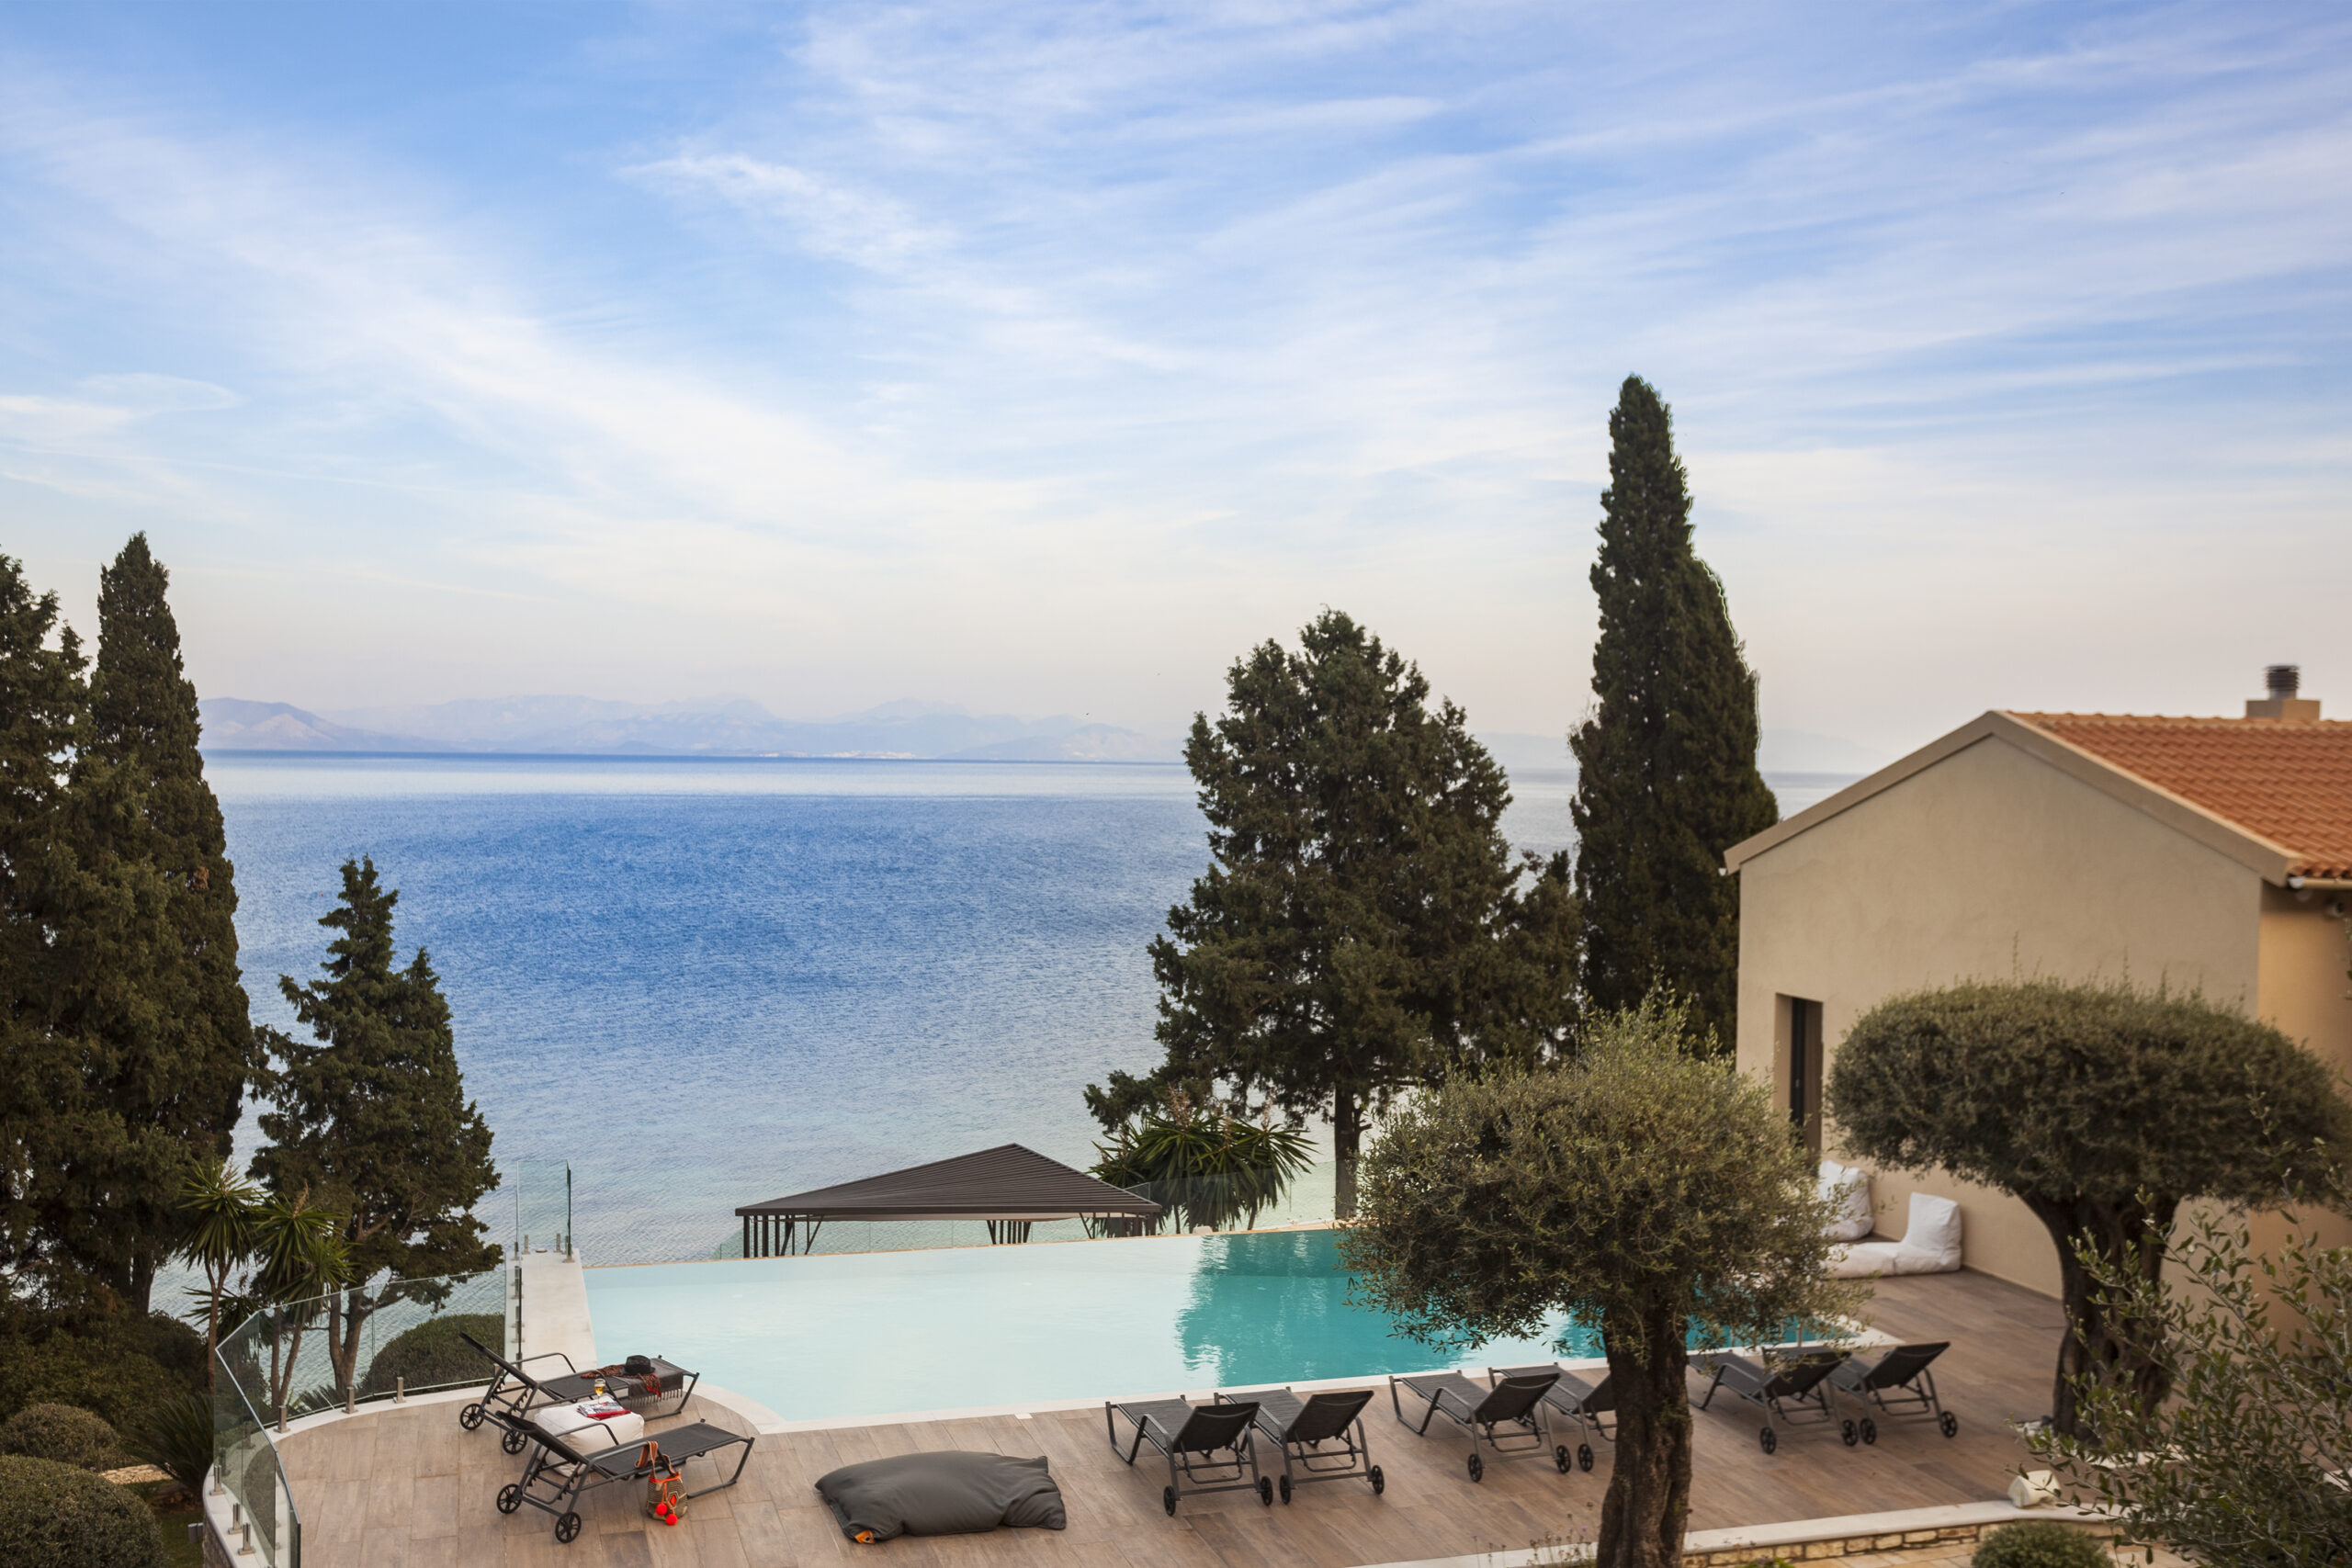 Why Choose A Private Villa For Your Holiday